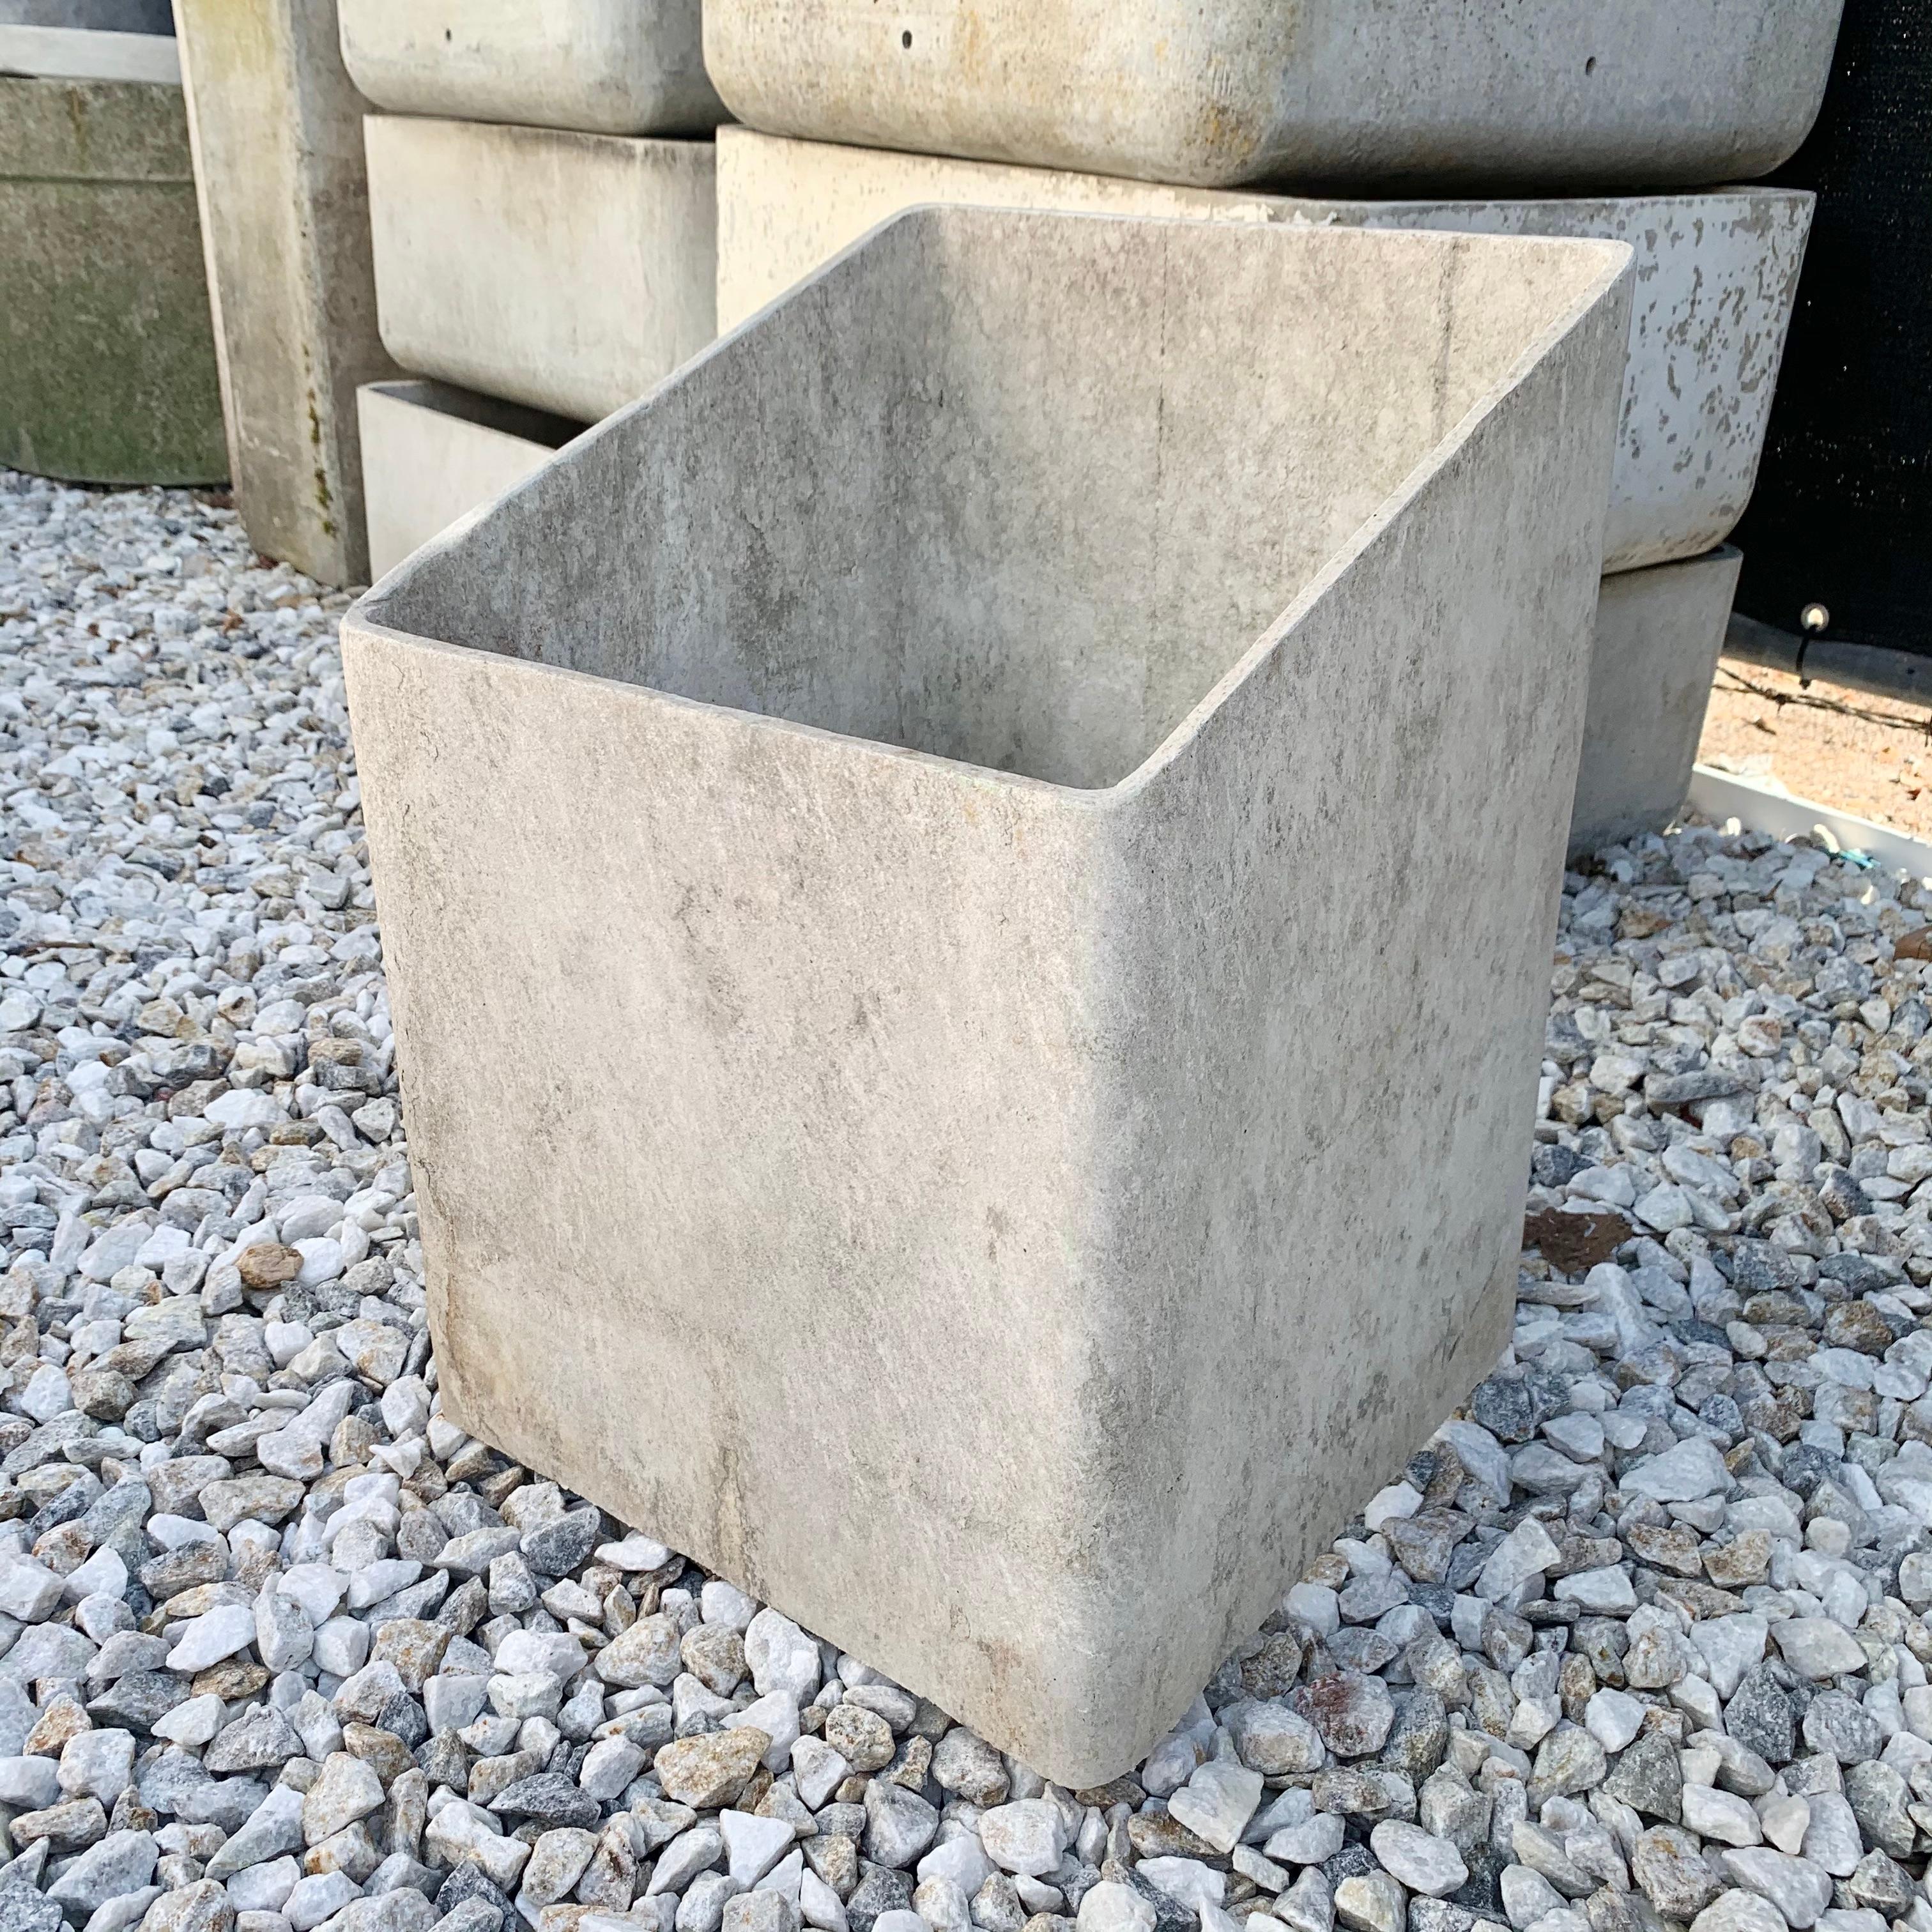 Unique, hollow concrete planter by Swiss architect Willy Guhl. Rectangular planter with hollow bottom. Perfect for large plants or small trees. Could also be used indoors/outdoors to place something inside that you don't want to look at, i.e. water